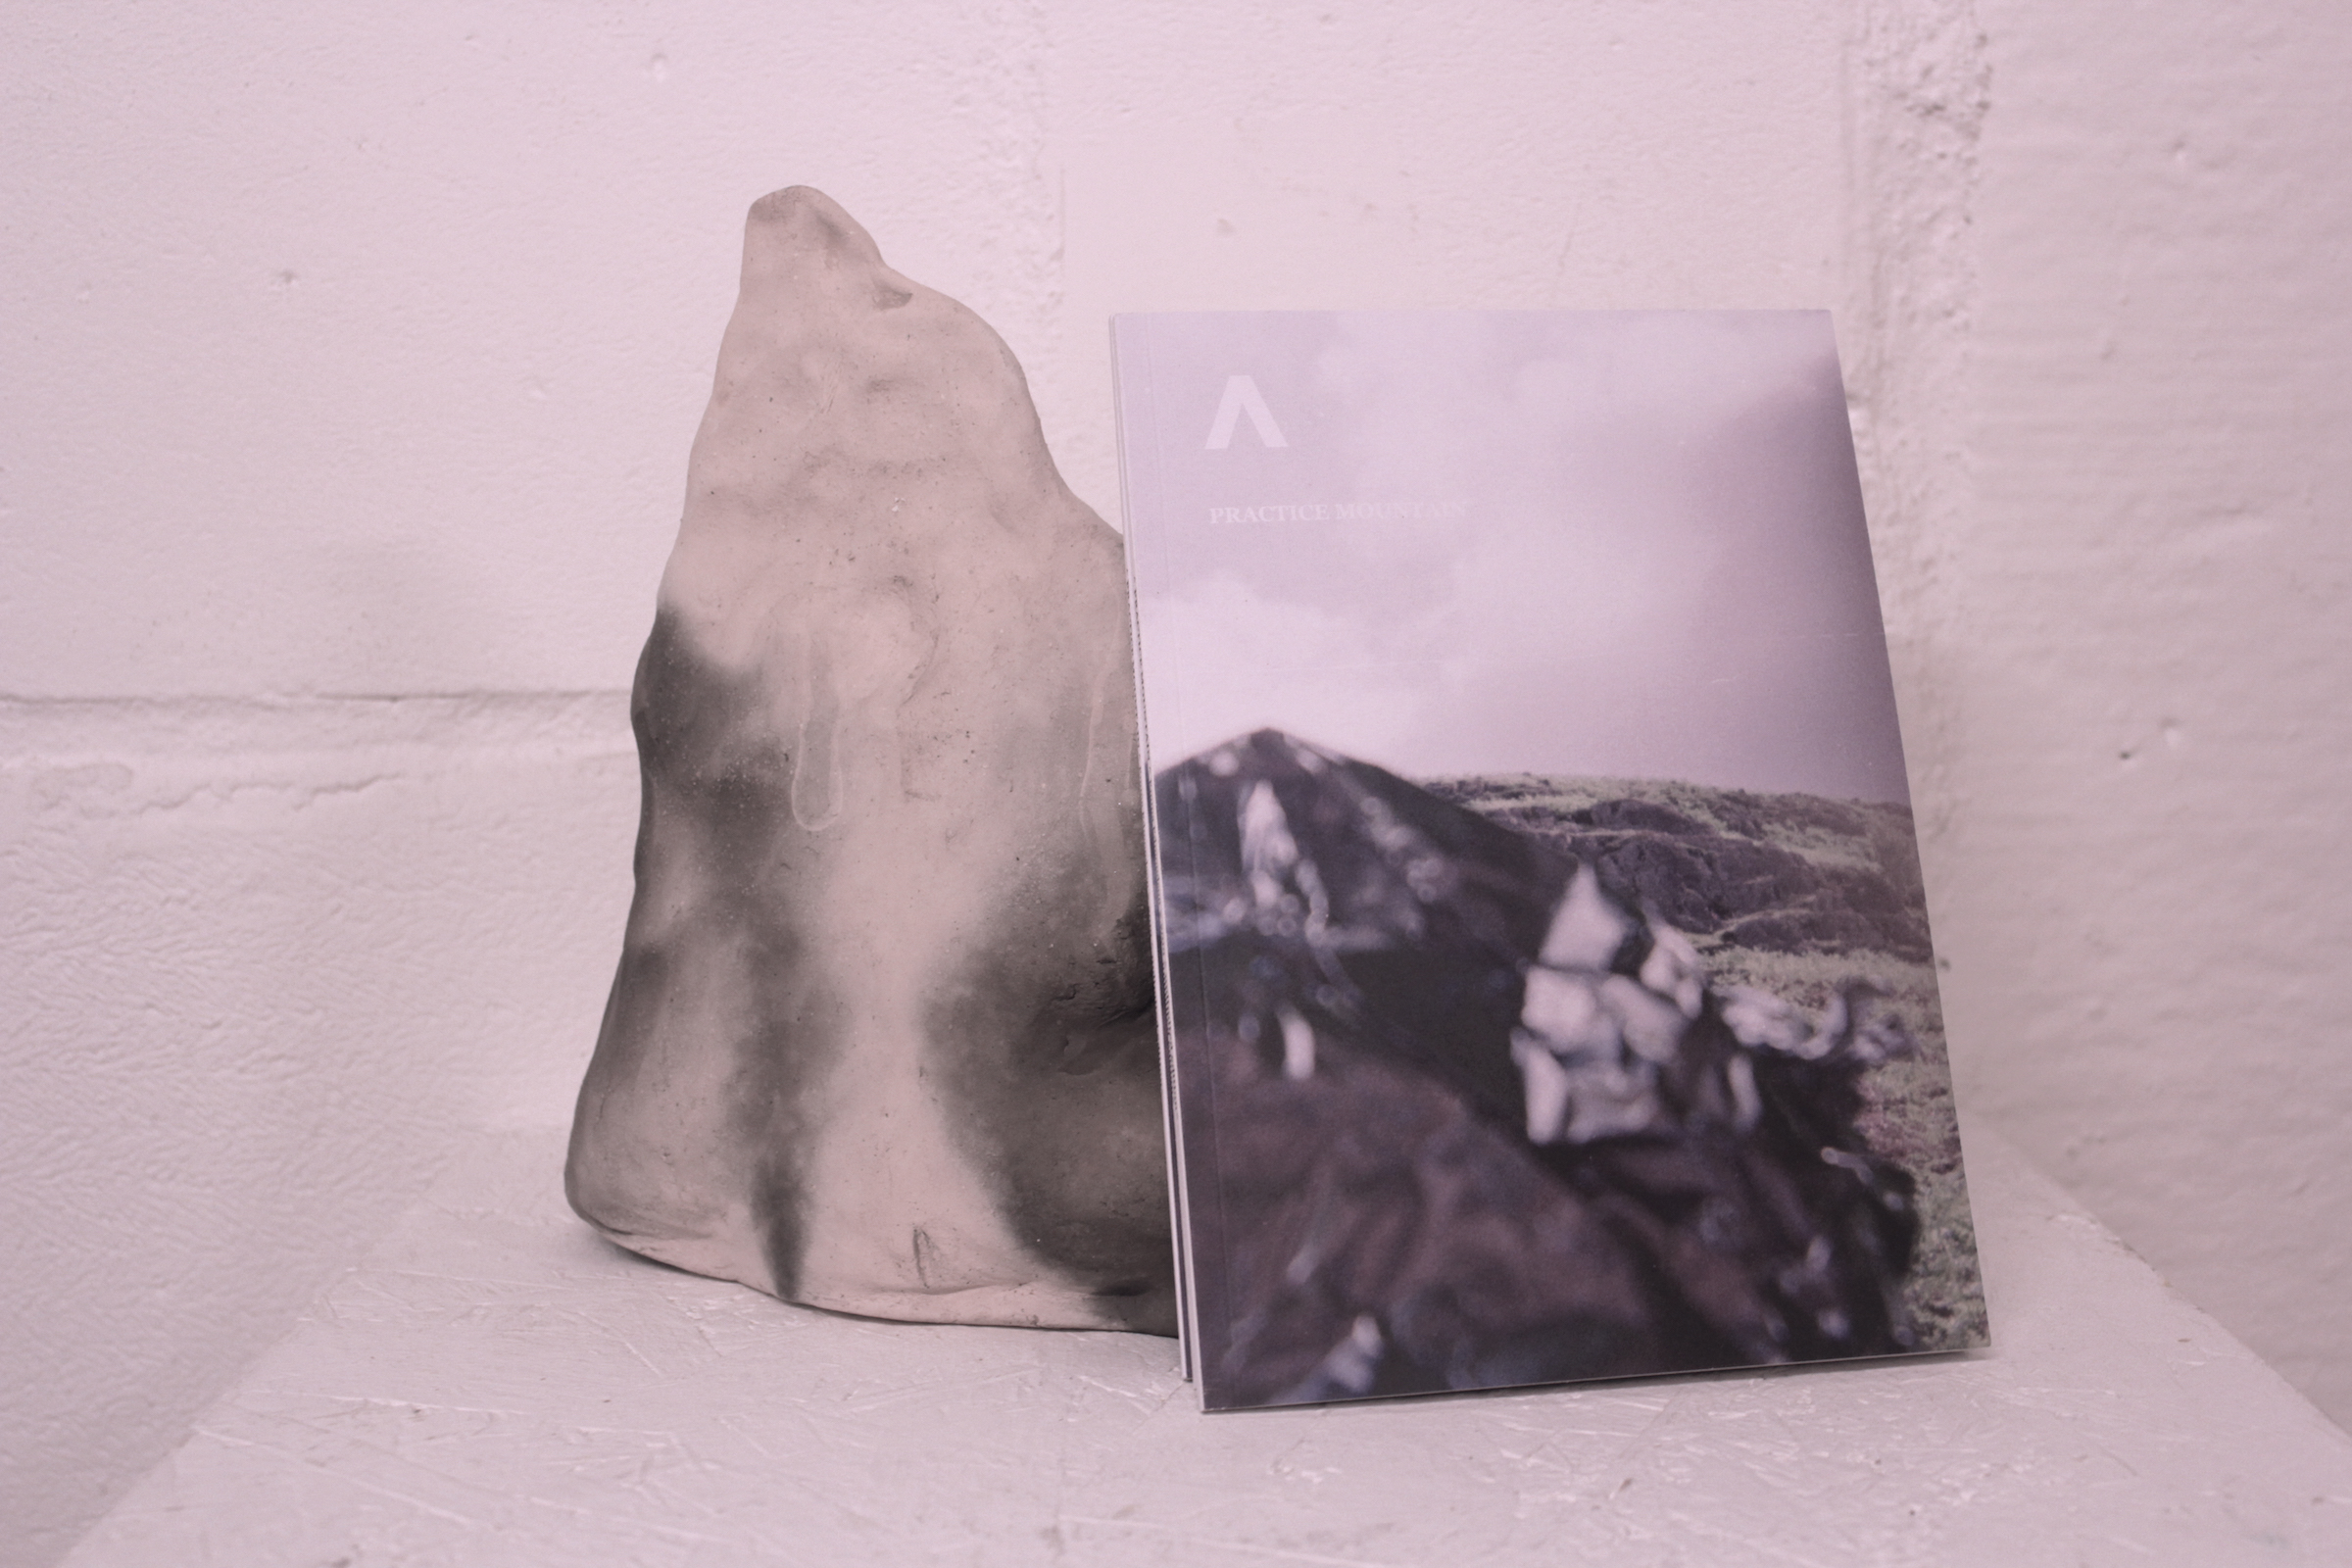 Practice Mountain Publication, show at Focal Point Gallery, 2021